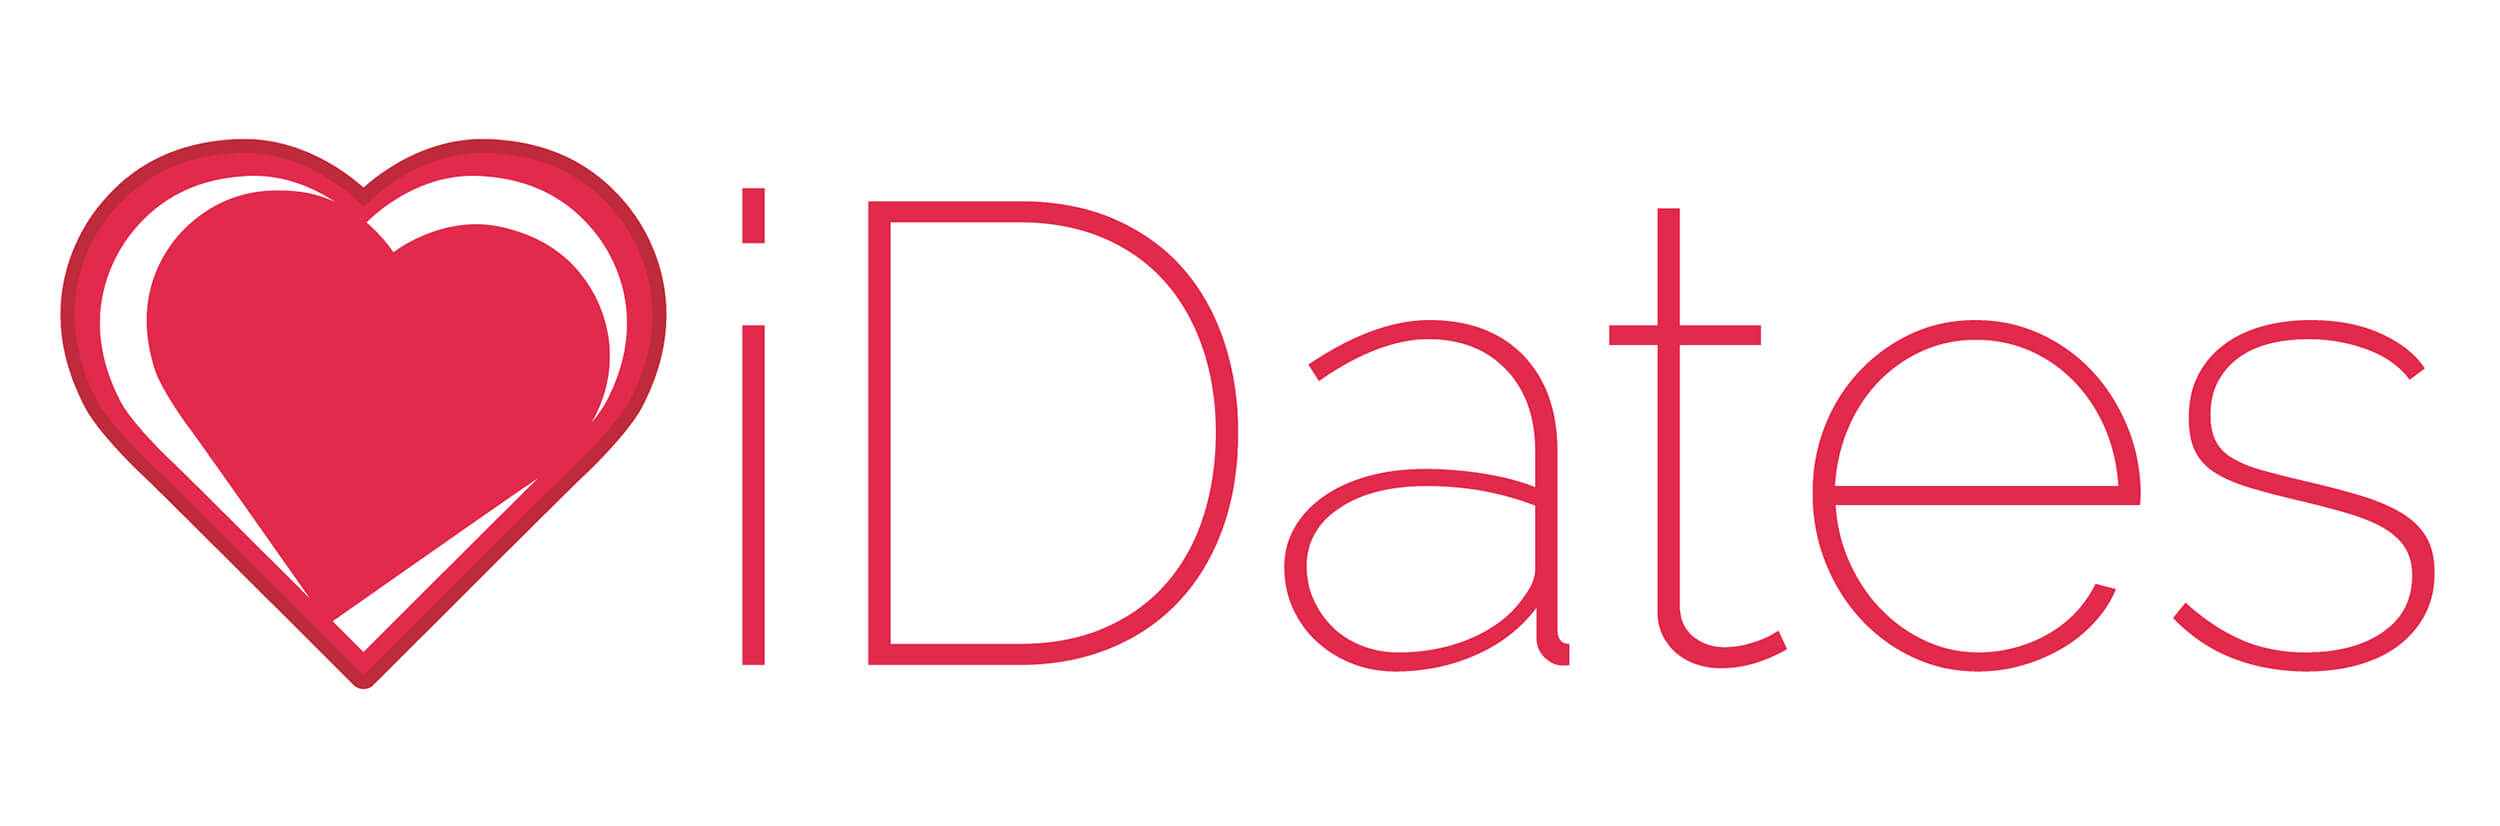 iDates home, Online Dating Site, Company Name Logo